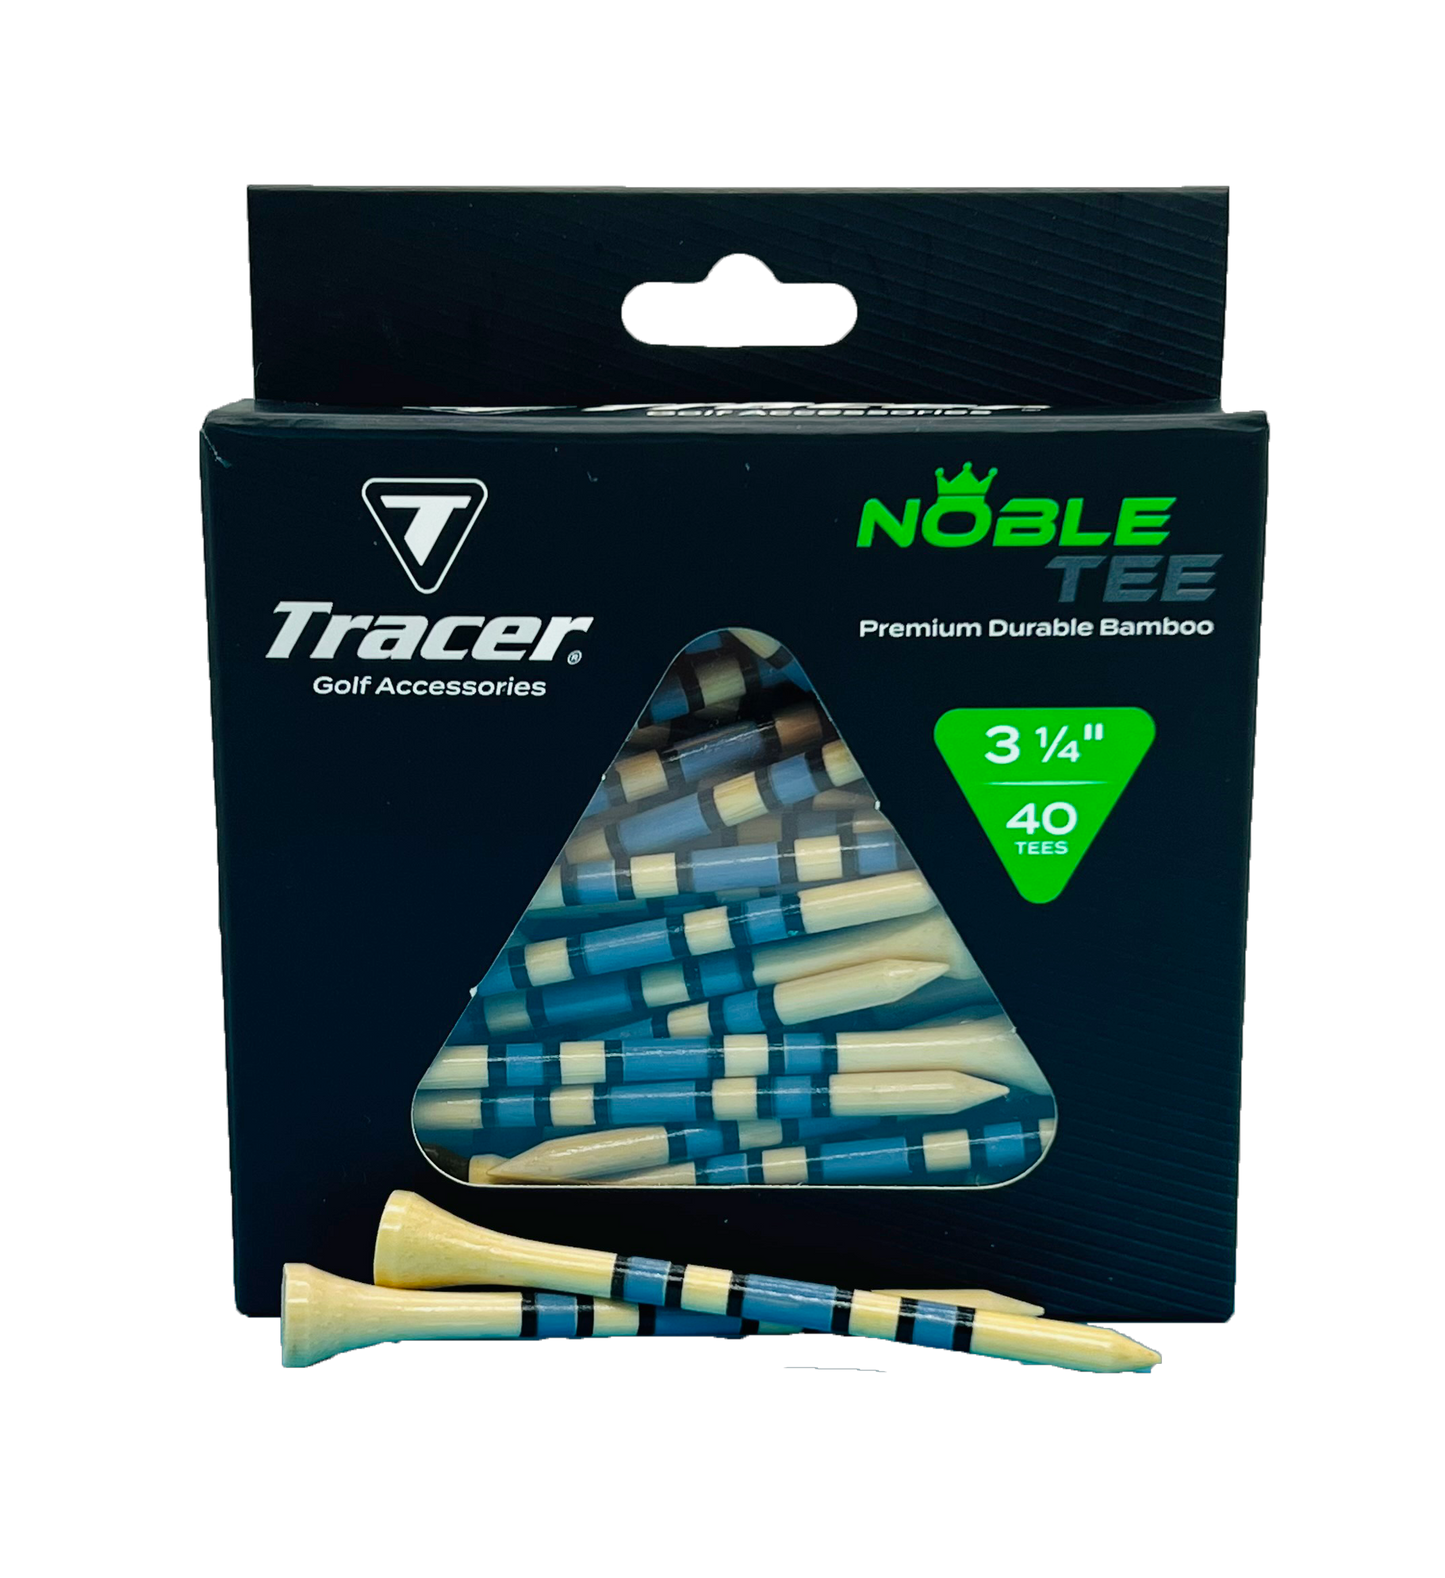 *NEW* Tracer Noble Tees - 3 1/4"